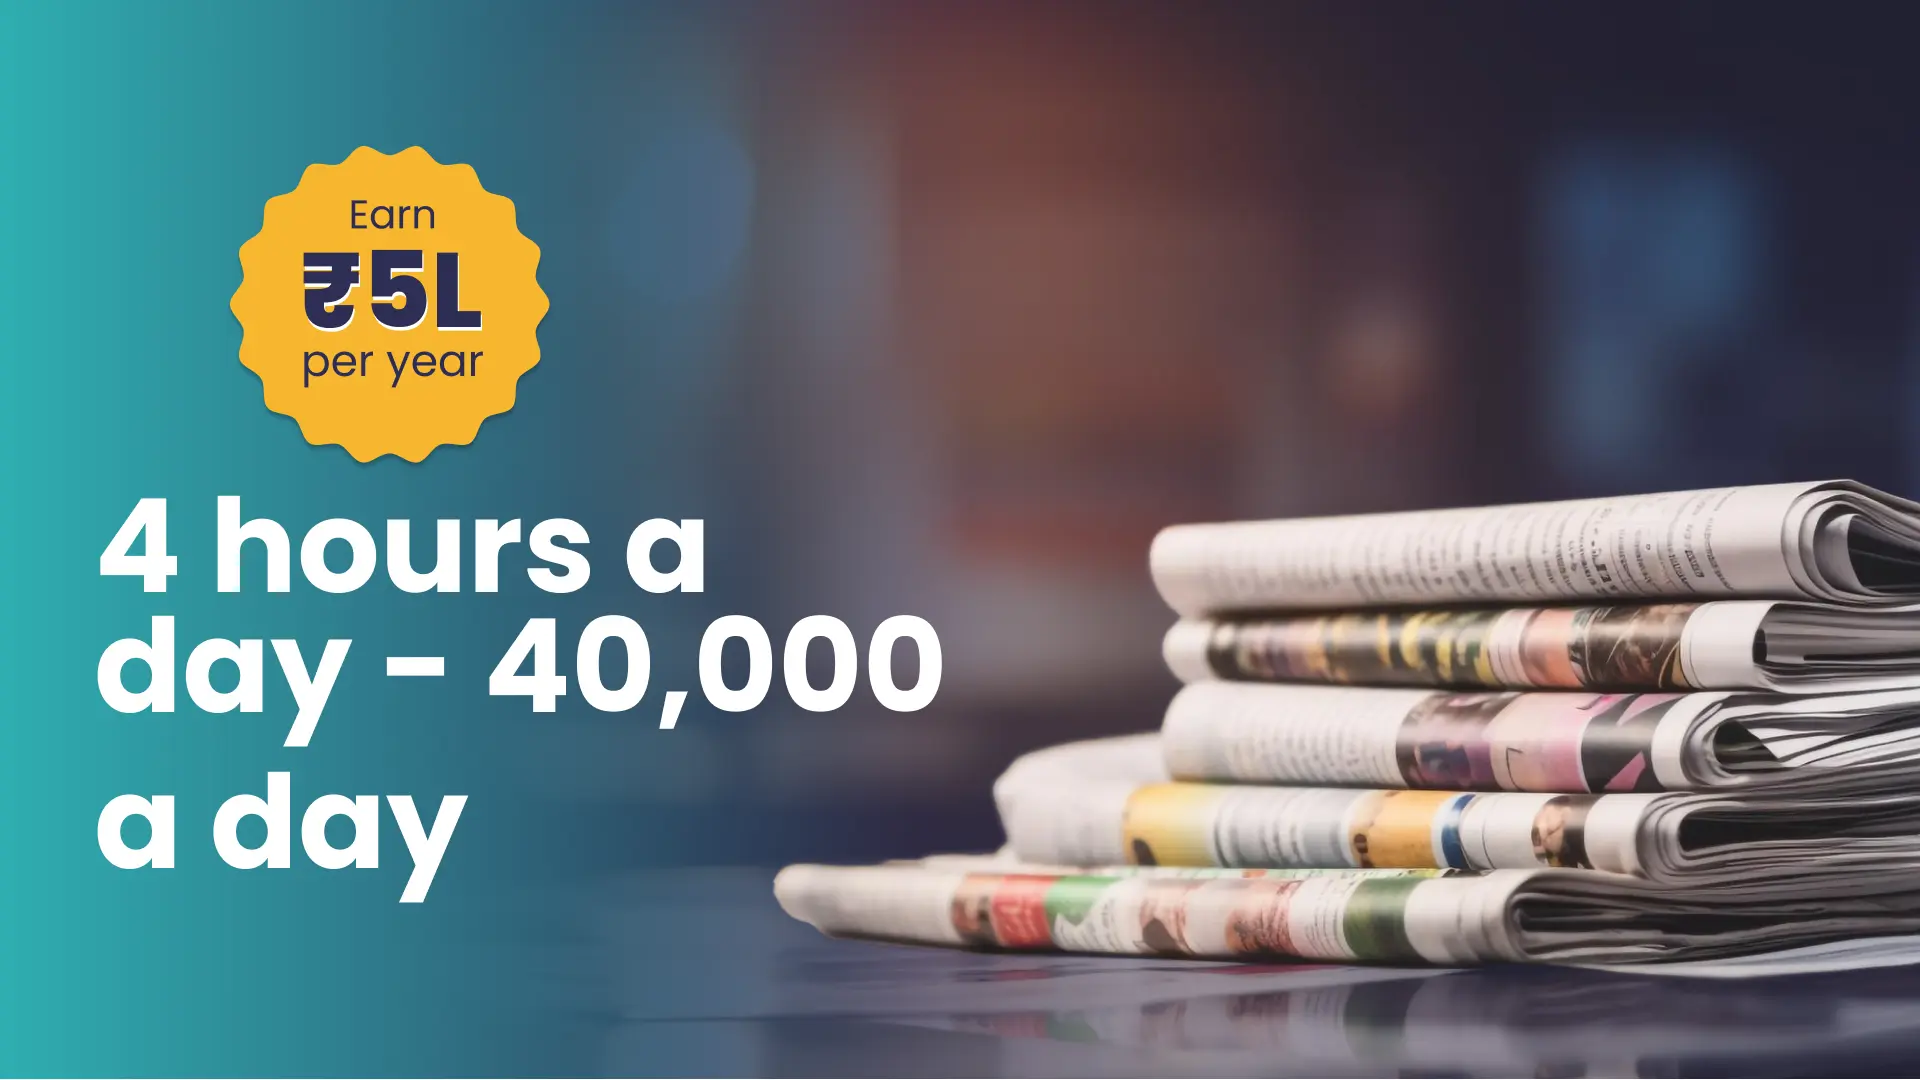 Course Trailer: Newspaper Agency Business Course - Earn 5 lakh/year. Watch to know more.